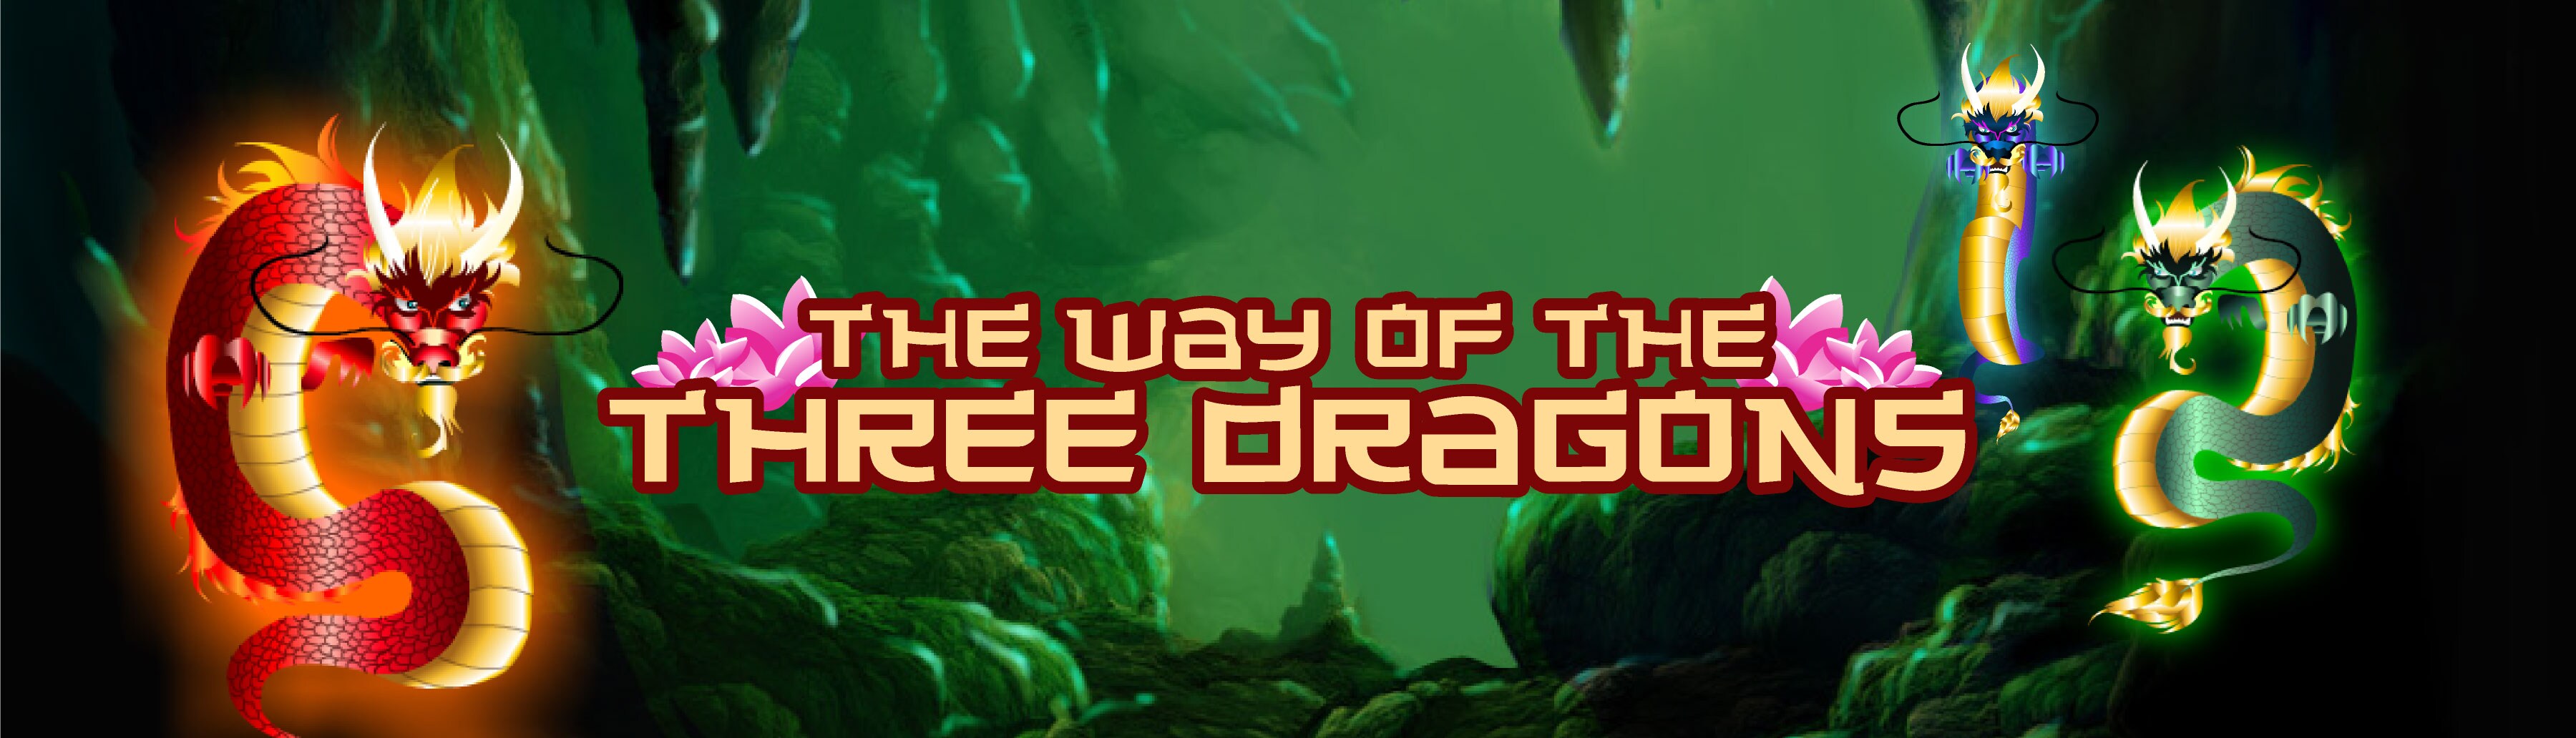 Slot Online THE WAY OF THE THREE DRAGONS